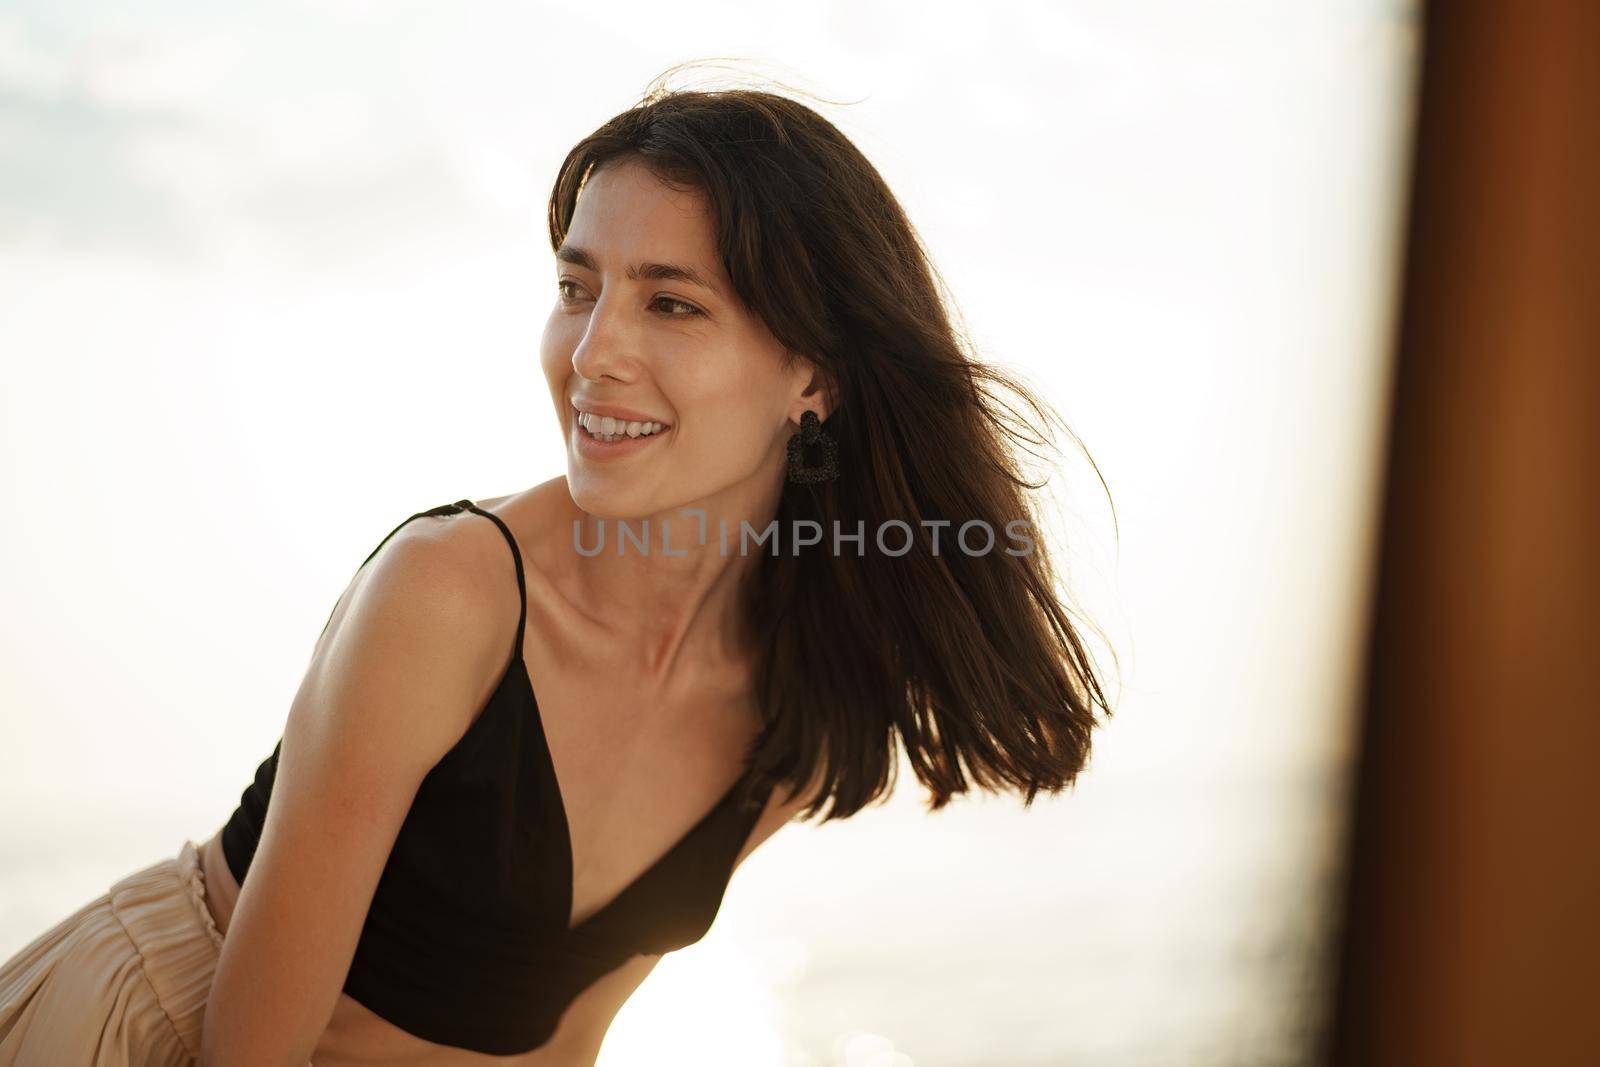 Young smiling woman outdoors portrait at the beach